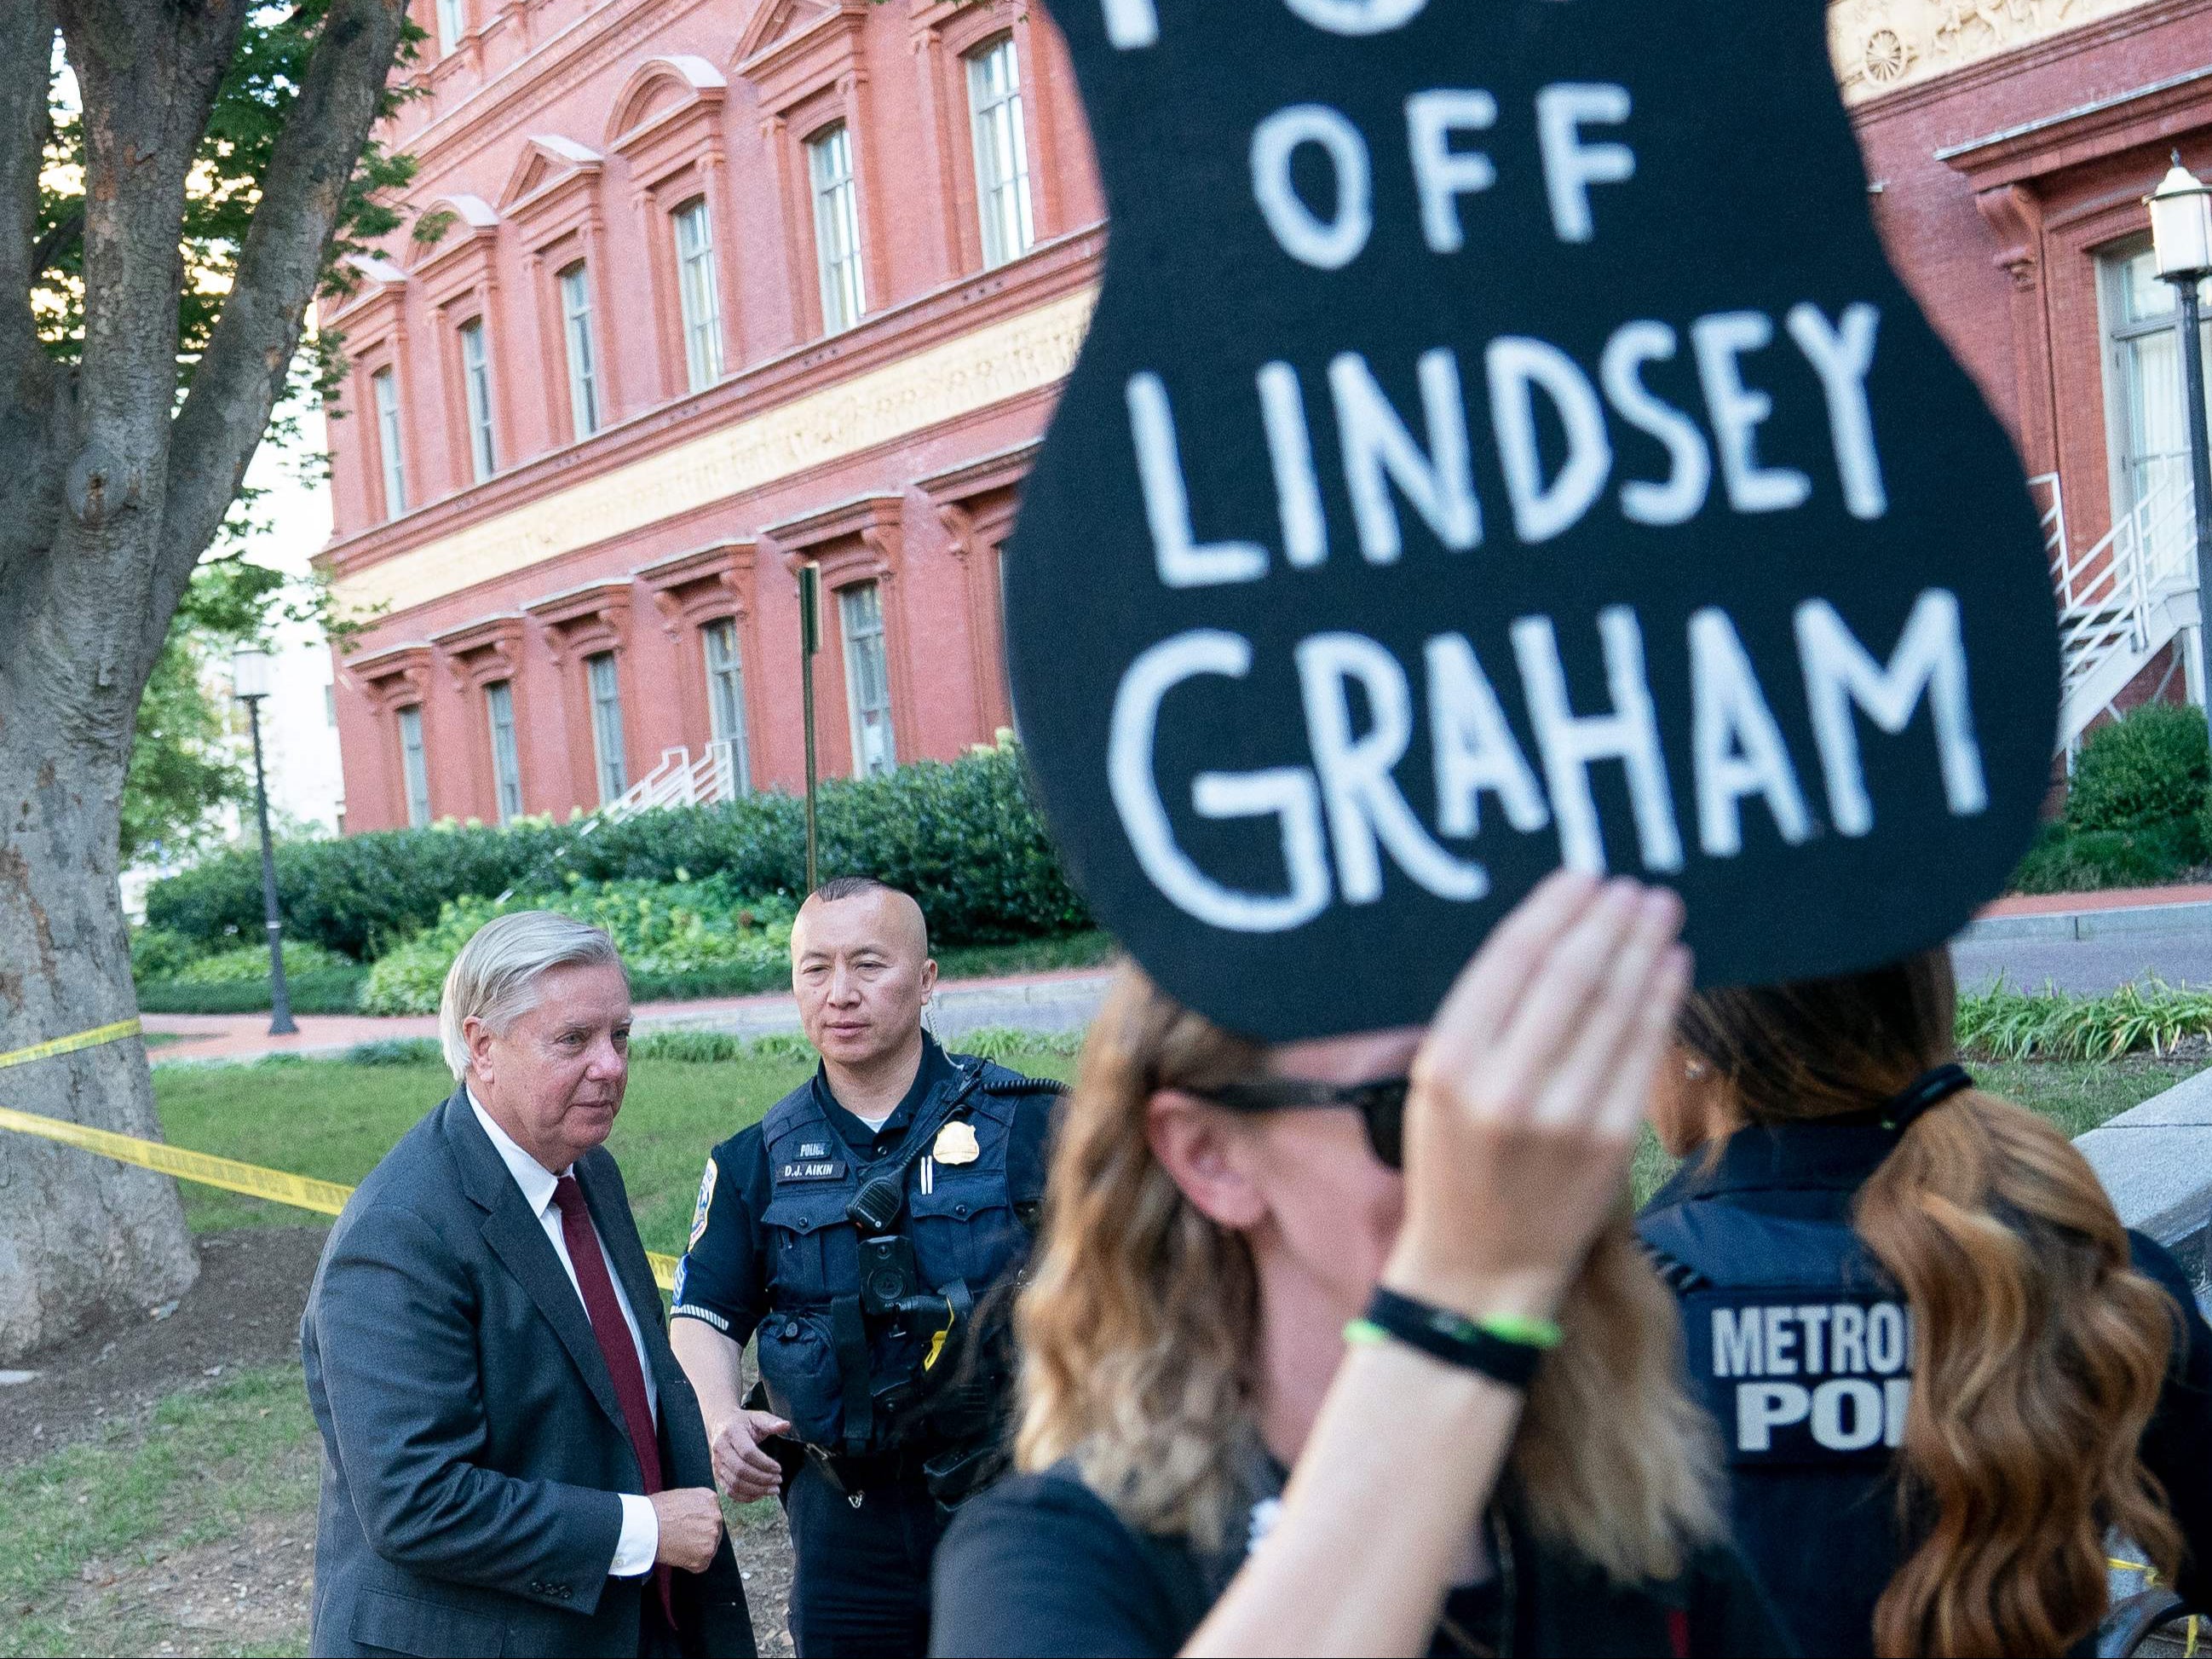 Republican senator Lindsey Graham was met with protests on Tuesday